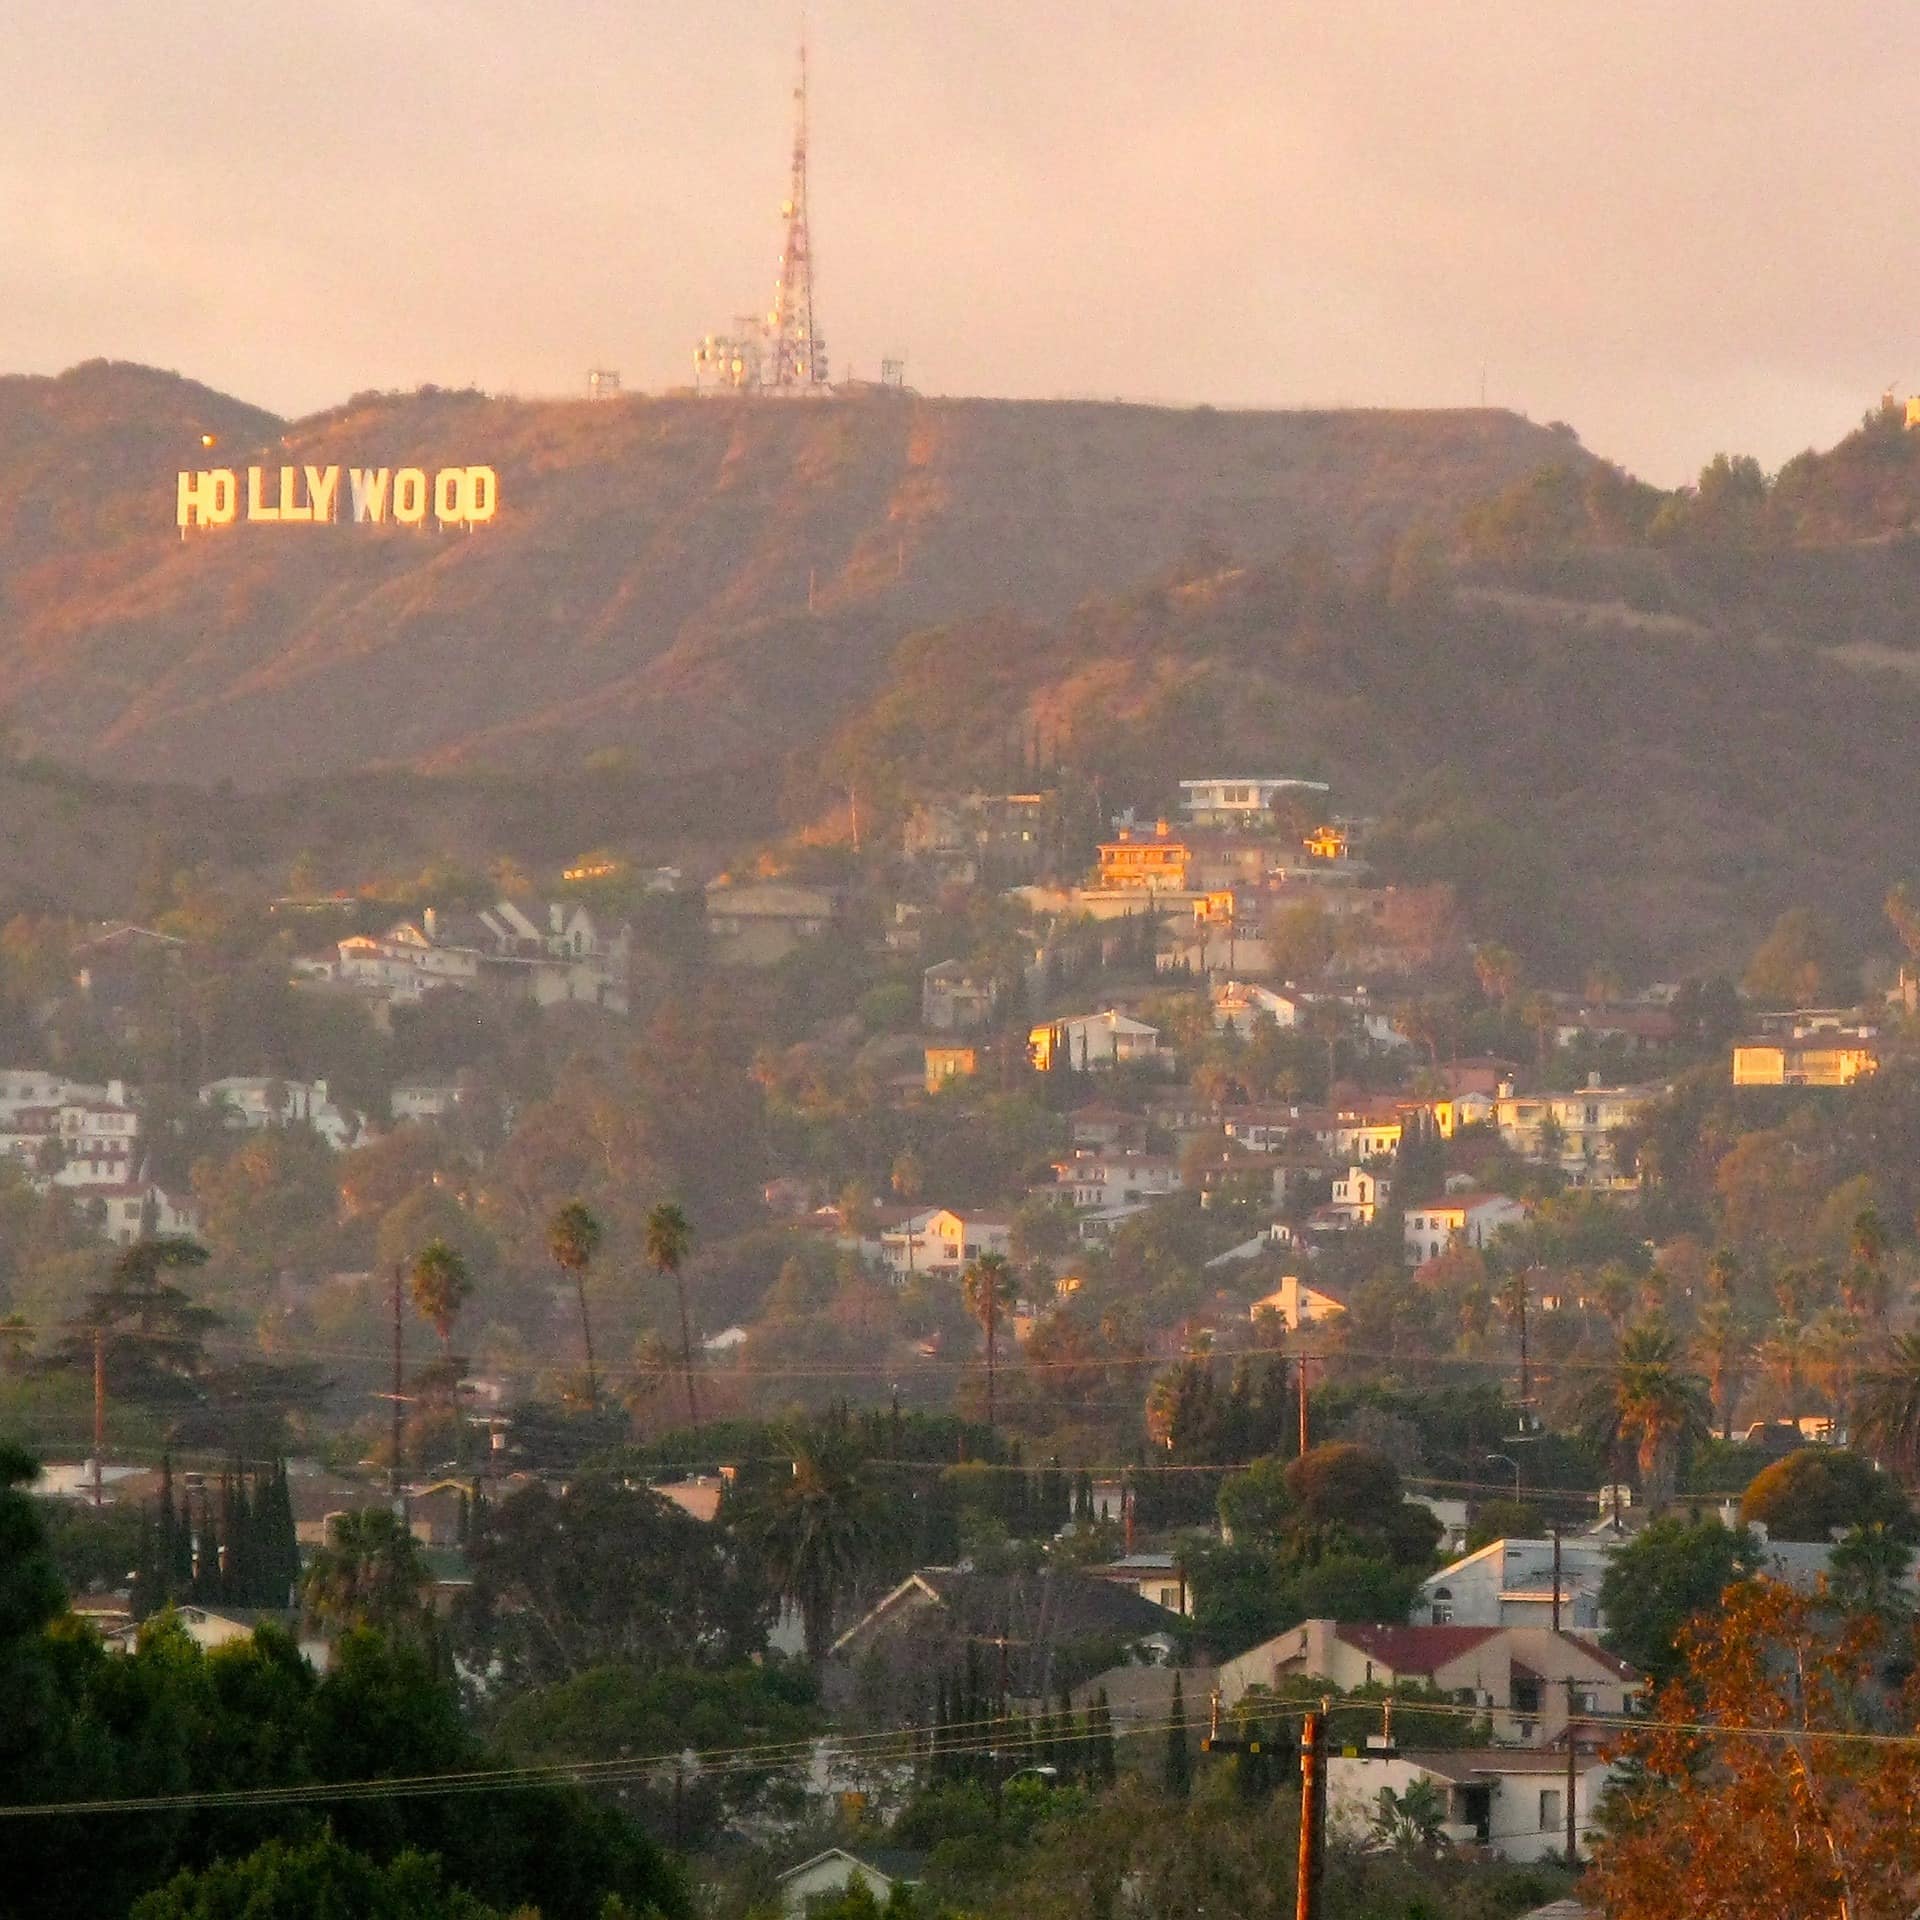 View of the Hollywood sign over the hills